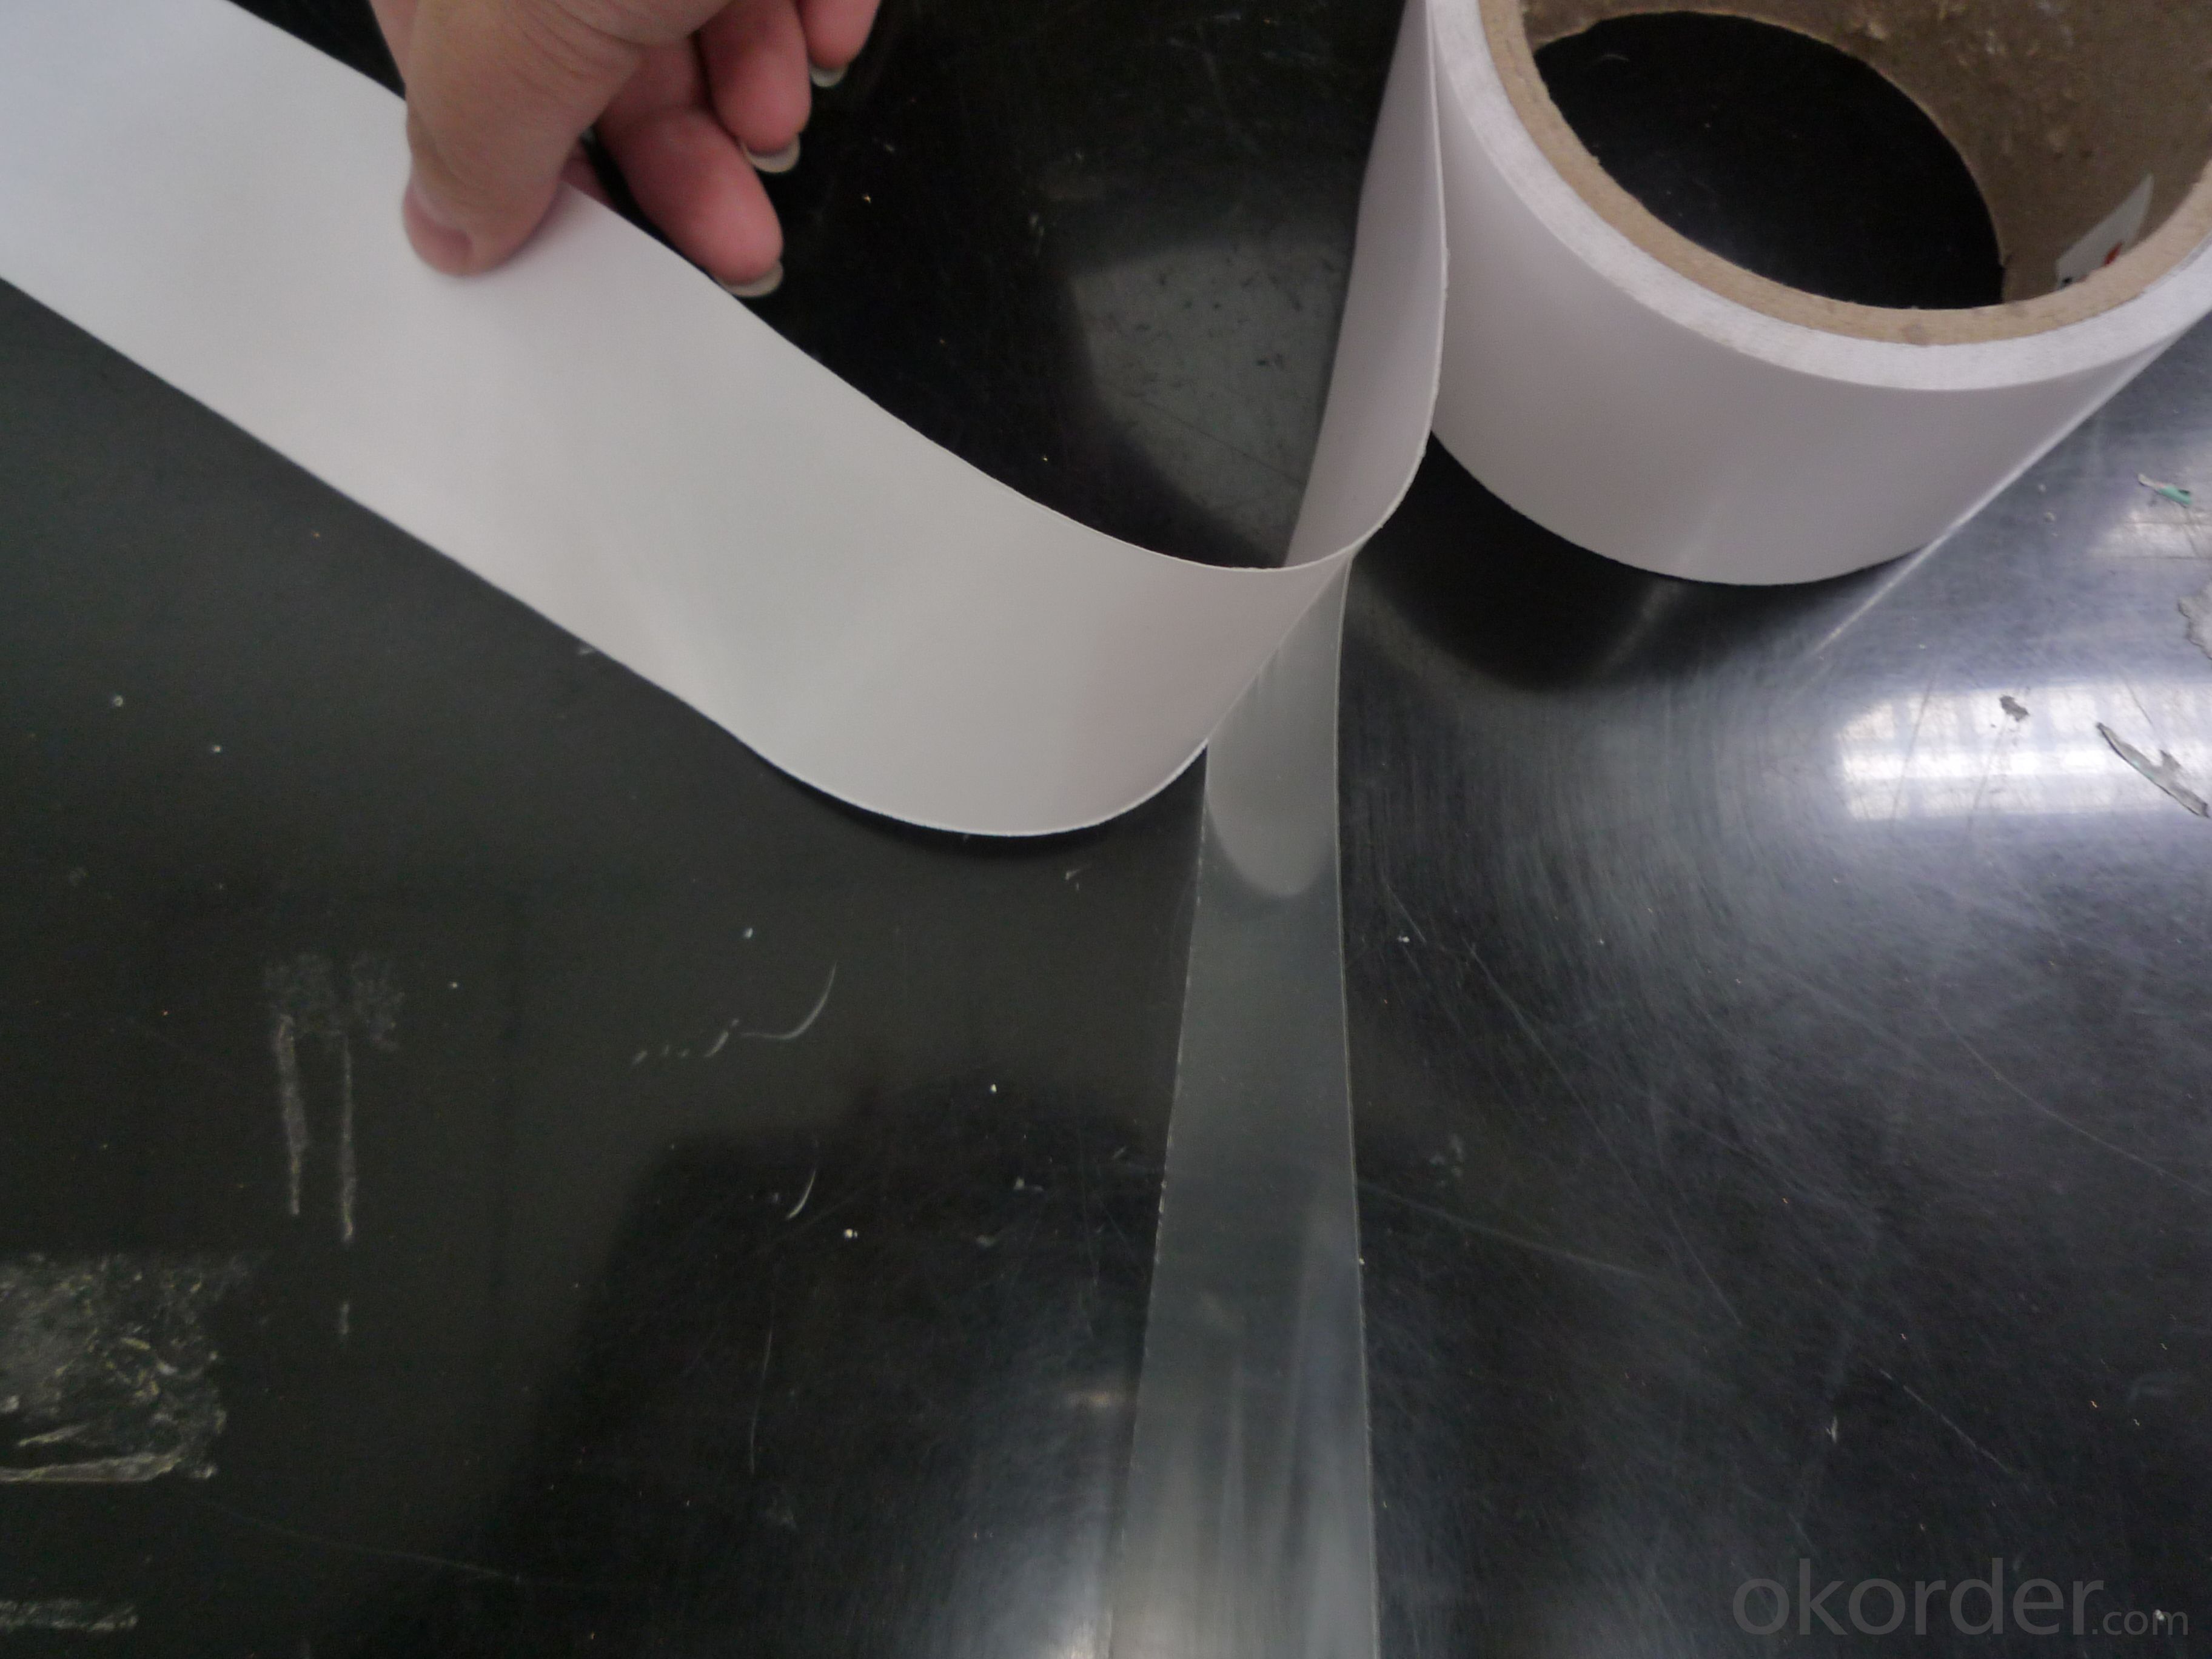 Acrylic Tissue Double Sided Tape Similar To 3M